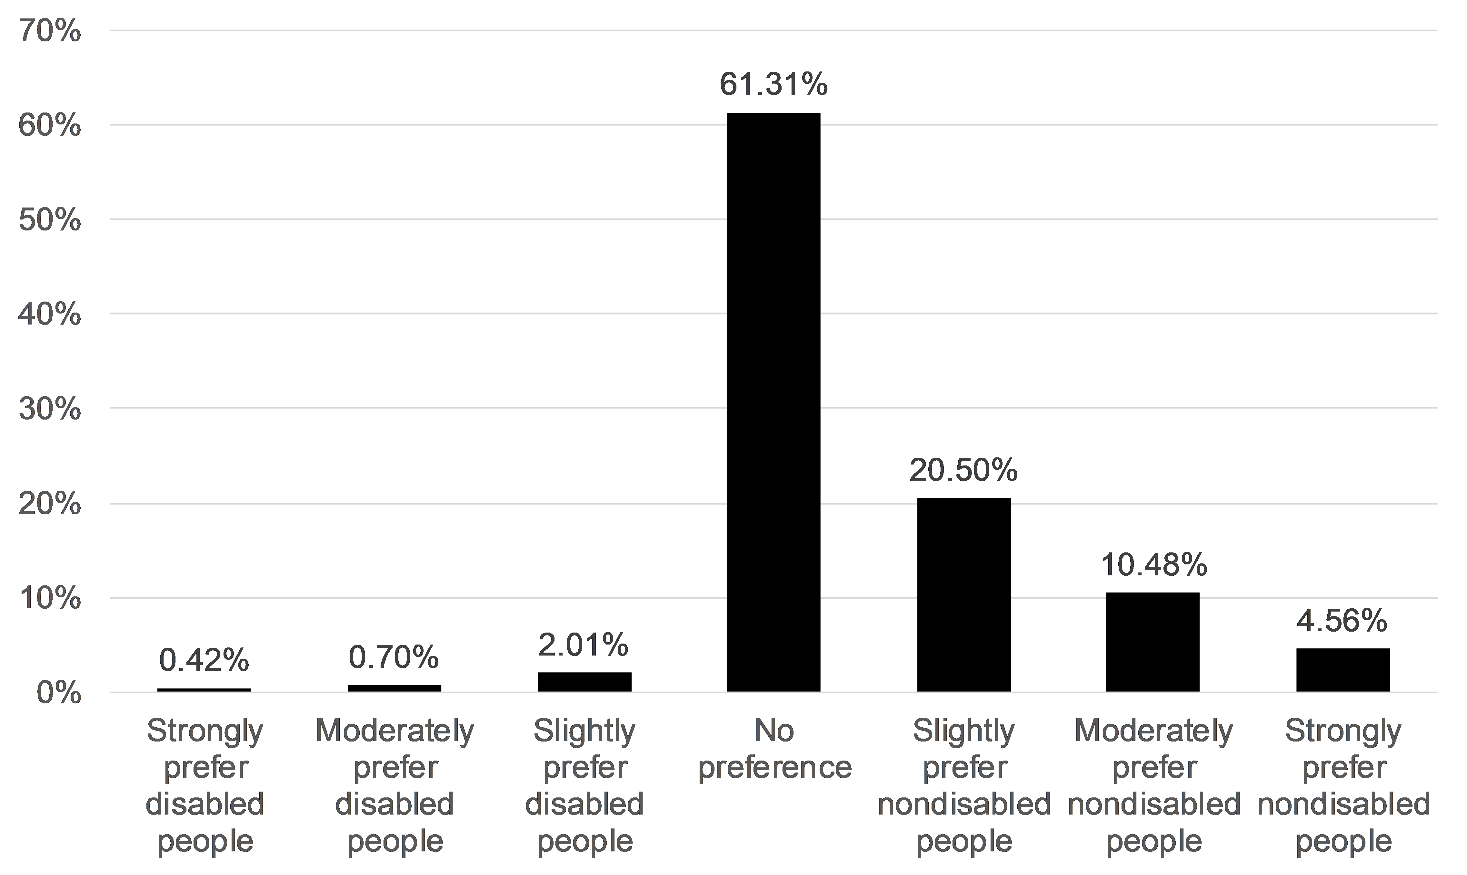 Figure 1. Distribution of participants’ explicit preferences for
              disabled or nondisabled people. The figure shows 0.4% of participants strongly
              preferred disabled people explicitly, 0.7% moderately preferred disabled
              people explicitly, and 2.0% slightly preferred disabled people explicitly.
              61.3% of participants reported no preference for disabled or nondisabled
              people. 20.5% of participants slightly preferred nondisabled people explicitly,
              10.5% moderately preferred nondisabled people explicitly, and 4.6% strongly
              preferred nondisabled people explicitly.